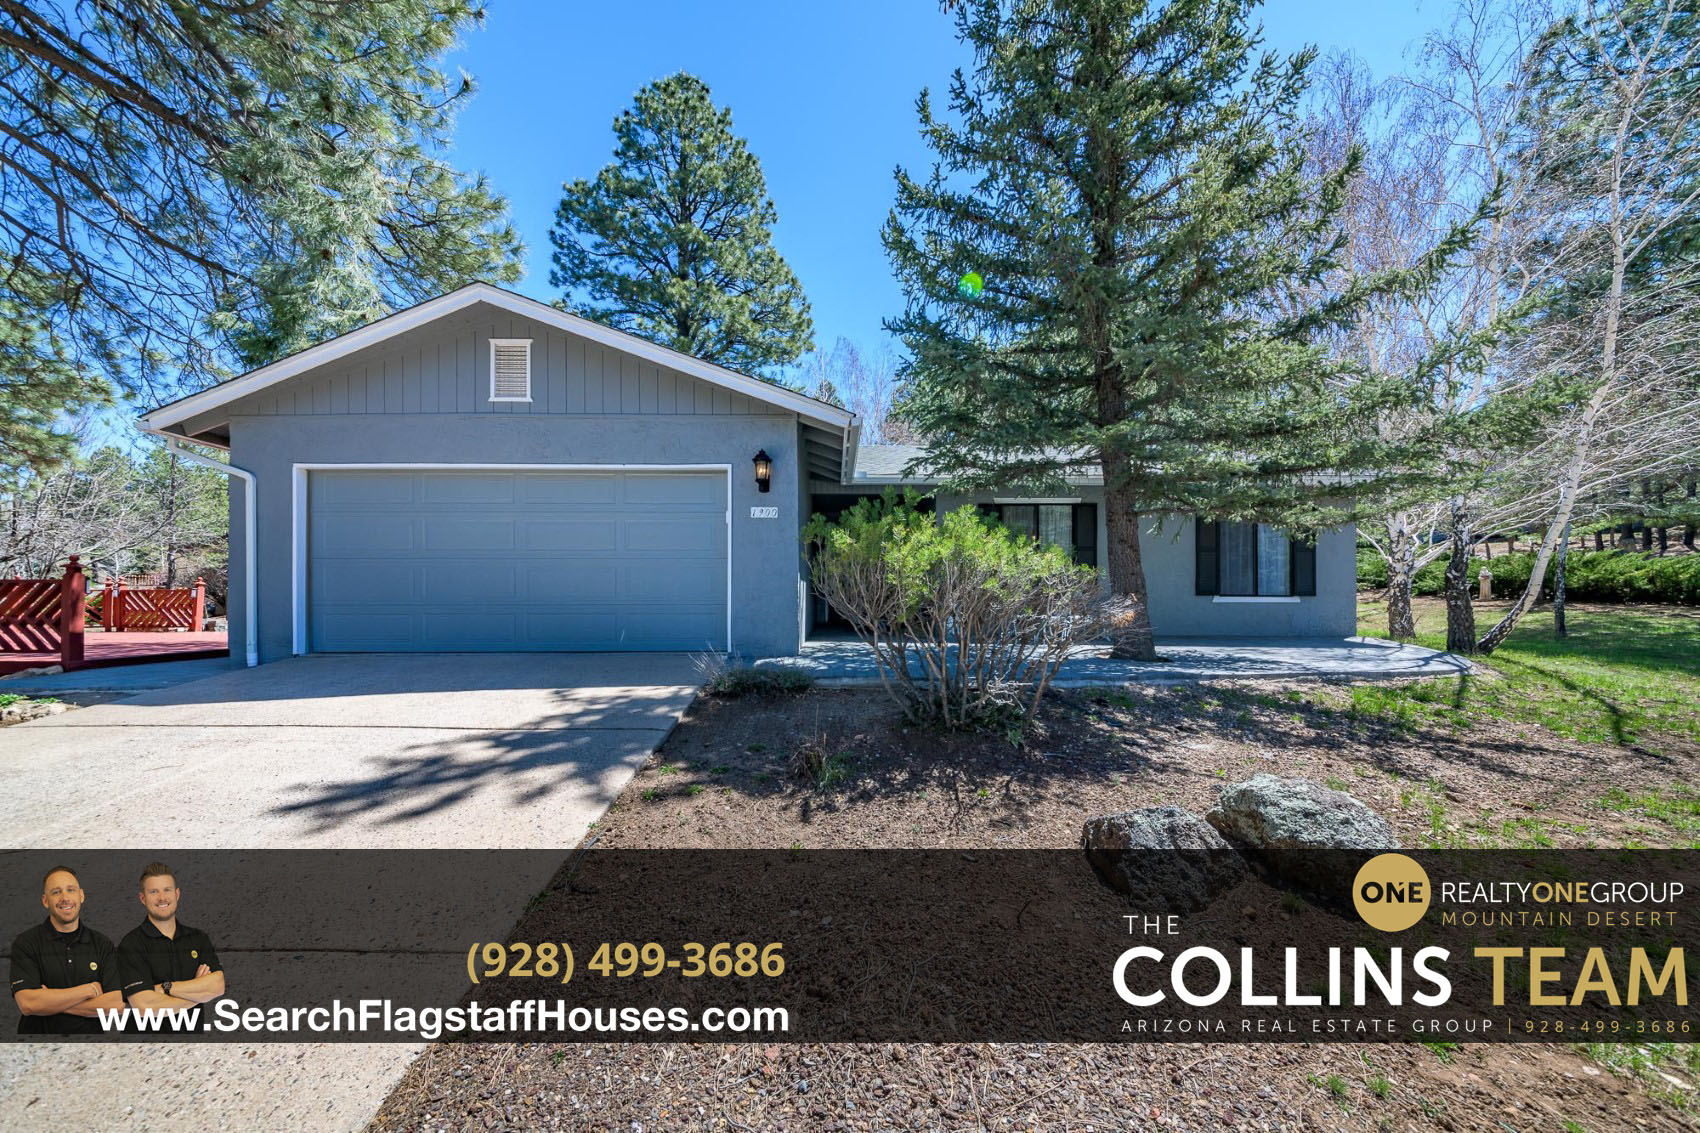 Flagstaff Continental Country Club Home for Sale - 1900 N Edgewood St